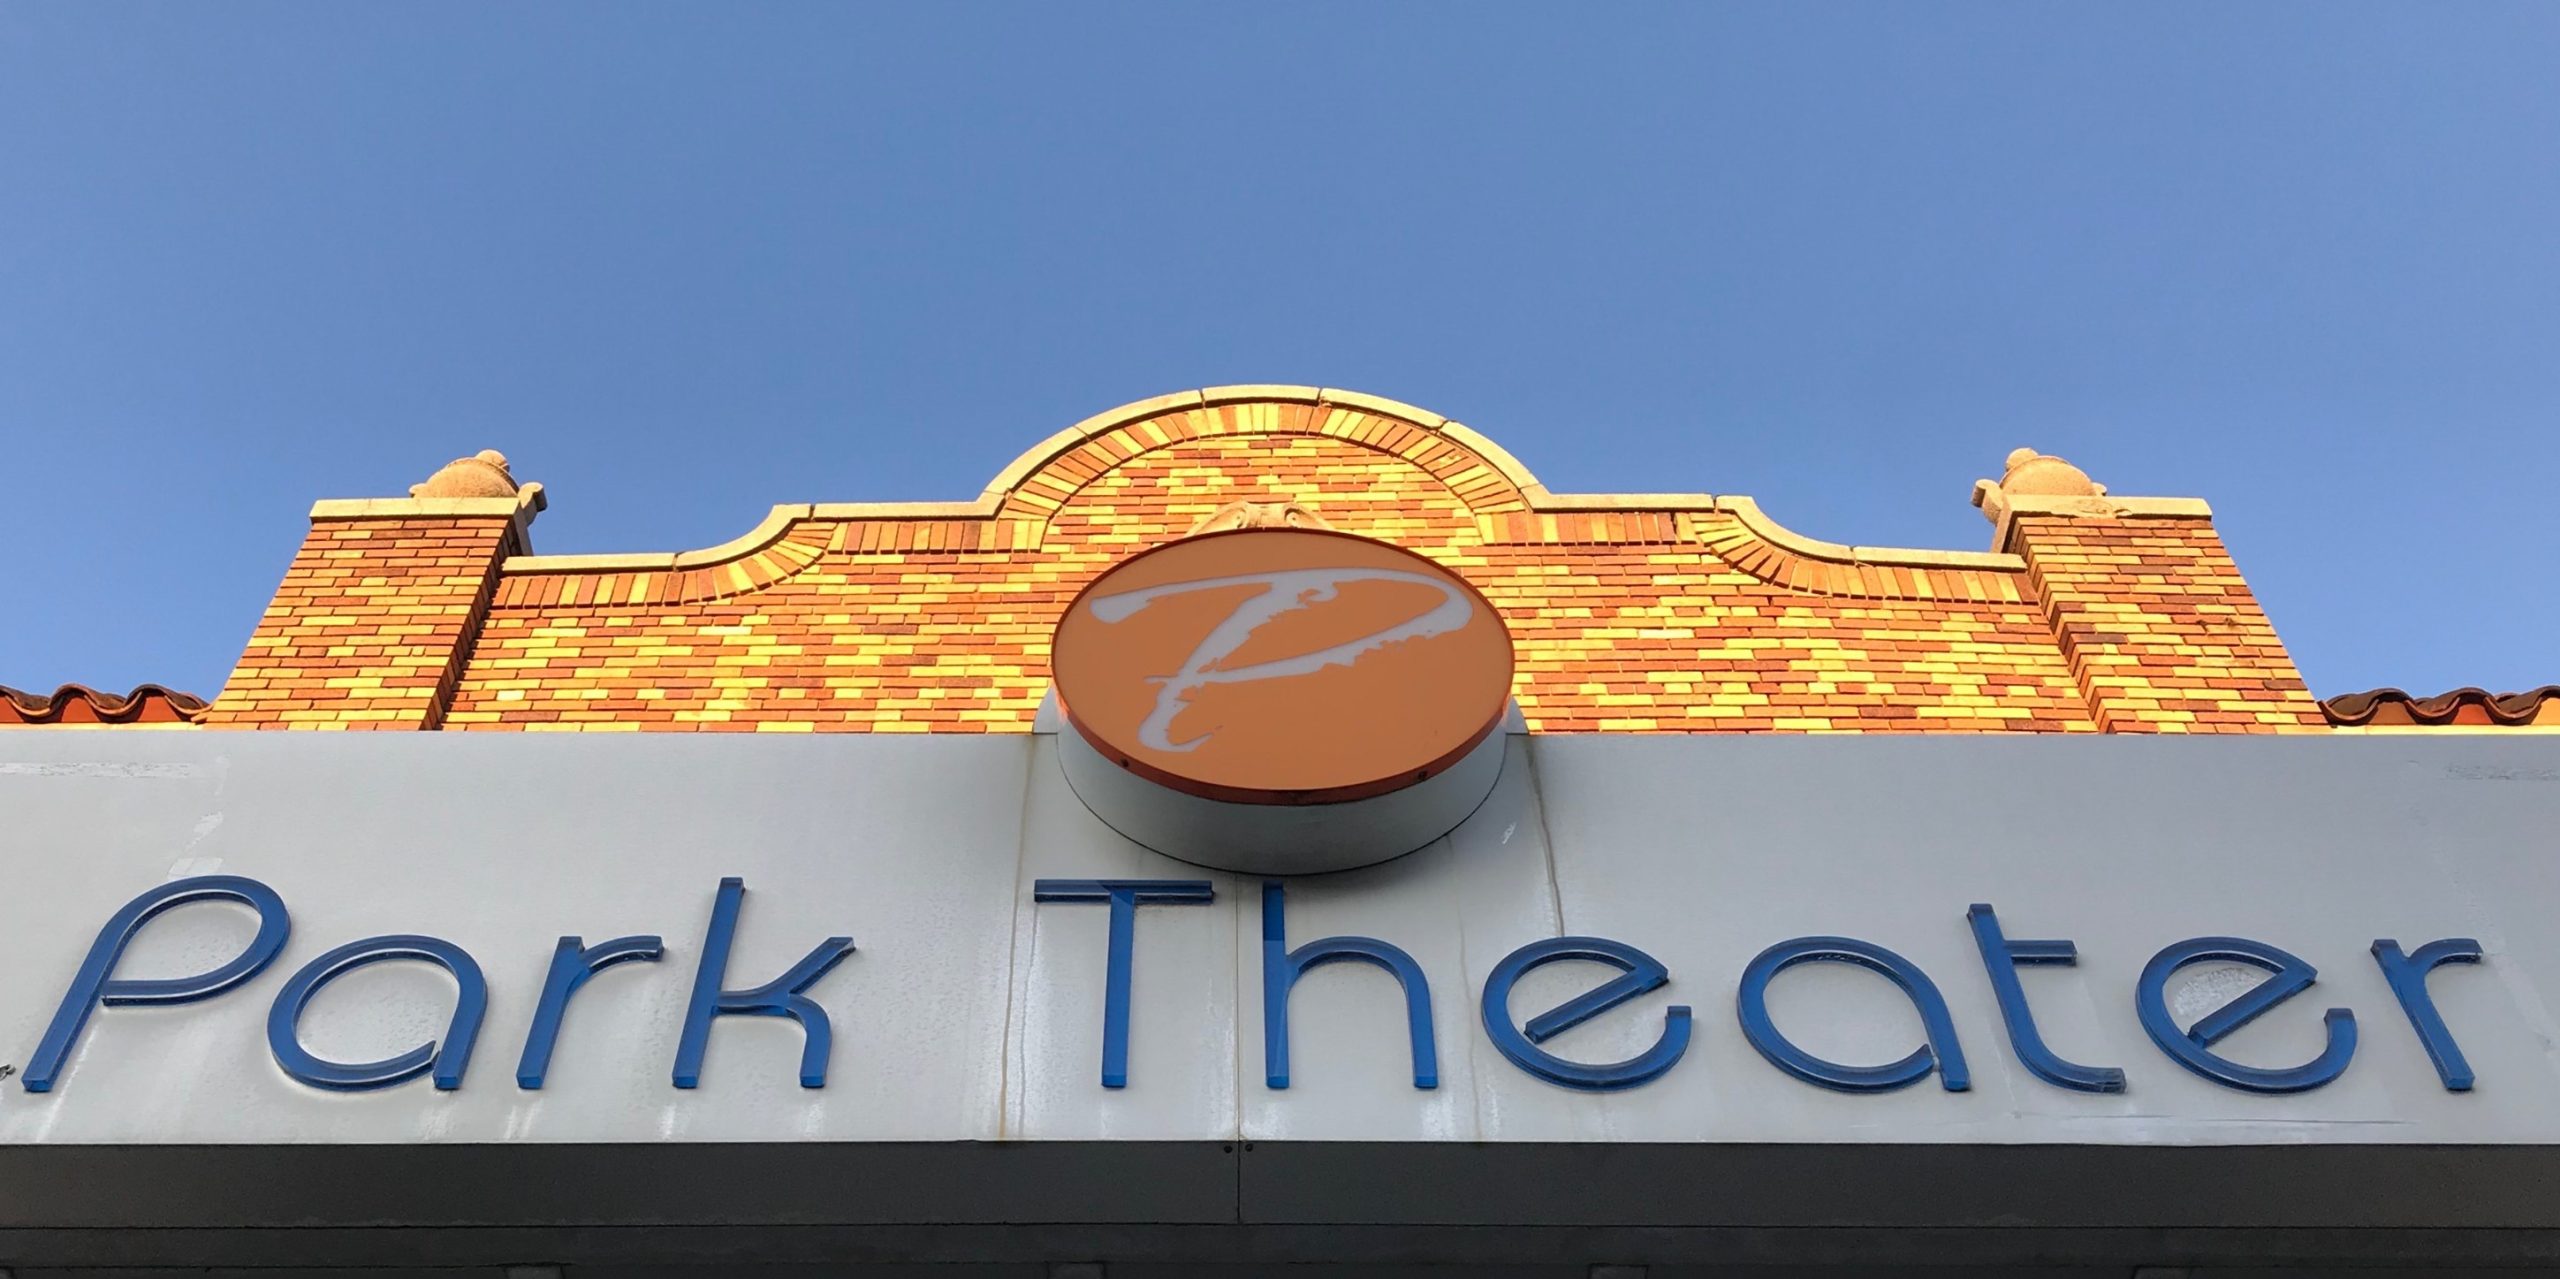 Park Theater sign